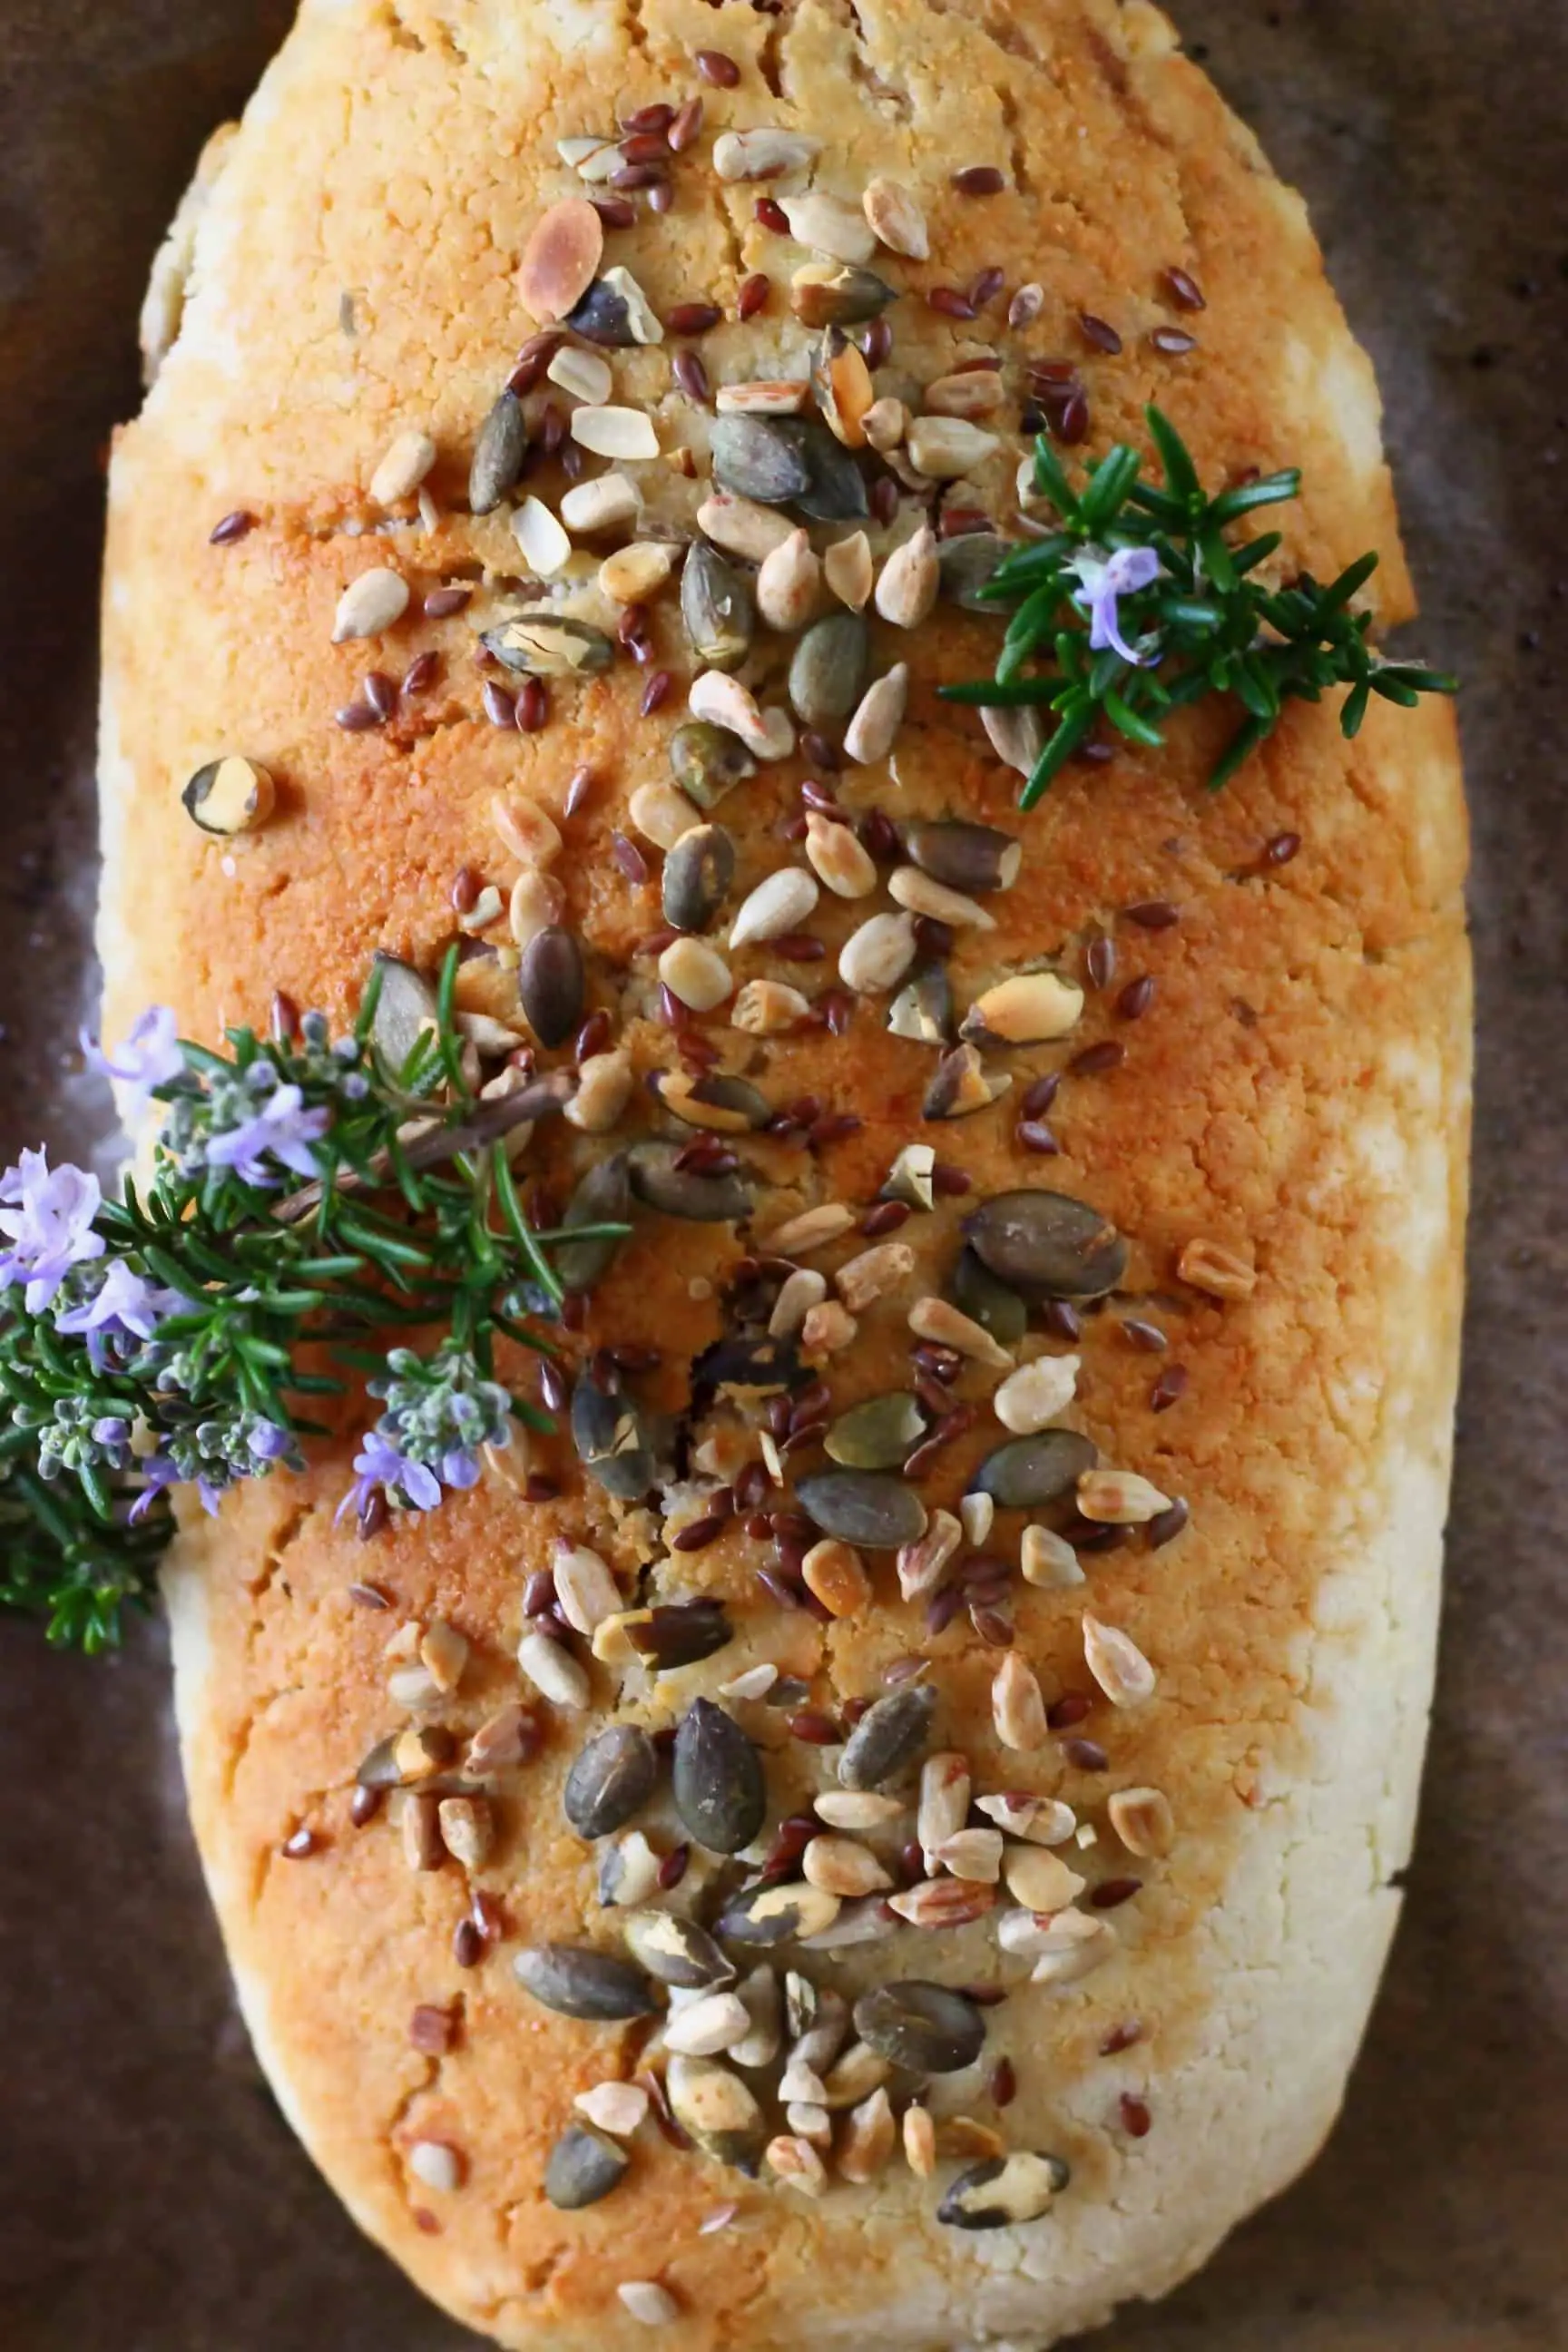 A golden brown vegan wellington topped with mixed seeds and sprigs of rosemary on a baking tray